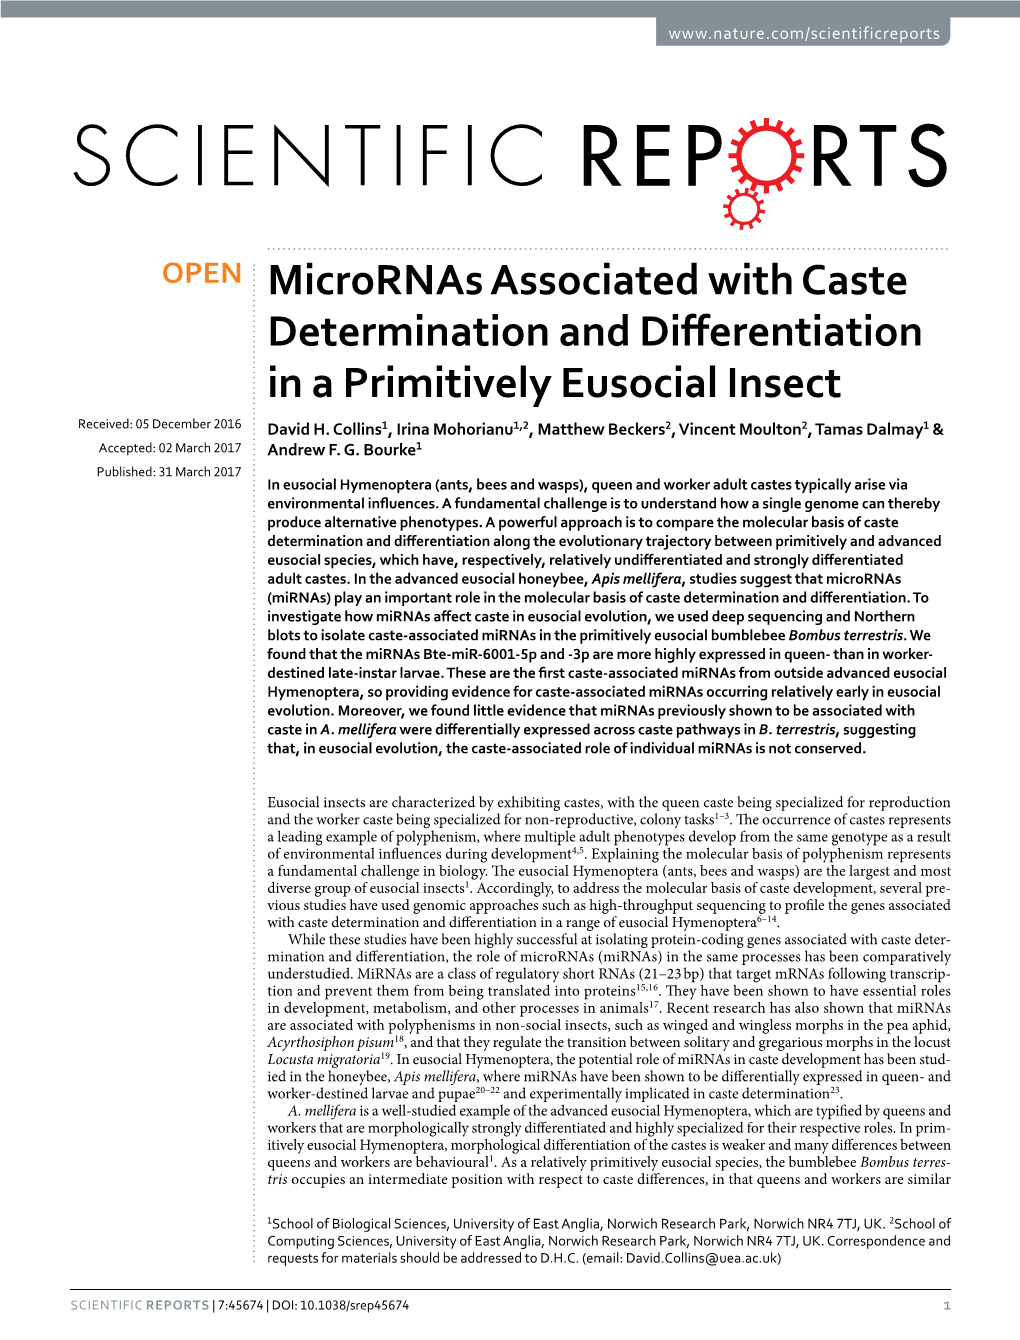 Micrornas Associated with Caste Determination and Differentiation in a Primitively Eusocial Insect Received: 05 December 2016 David H